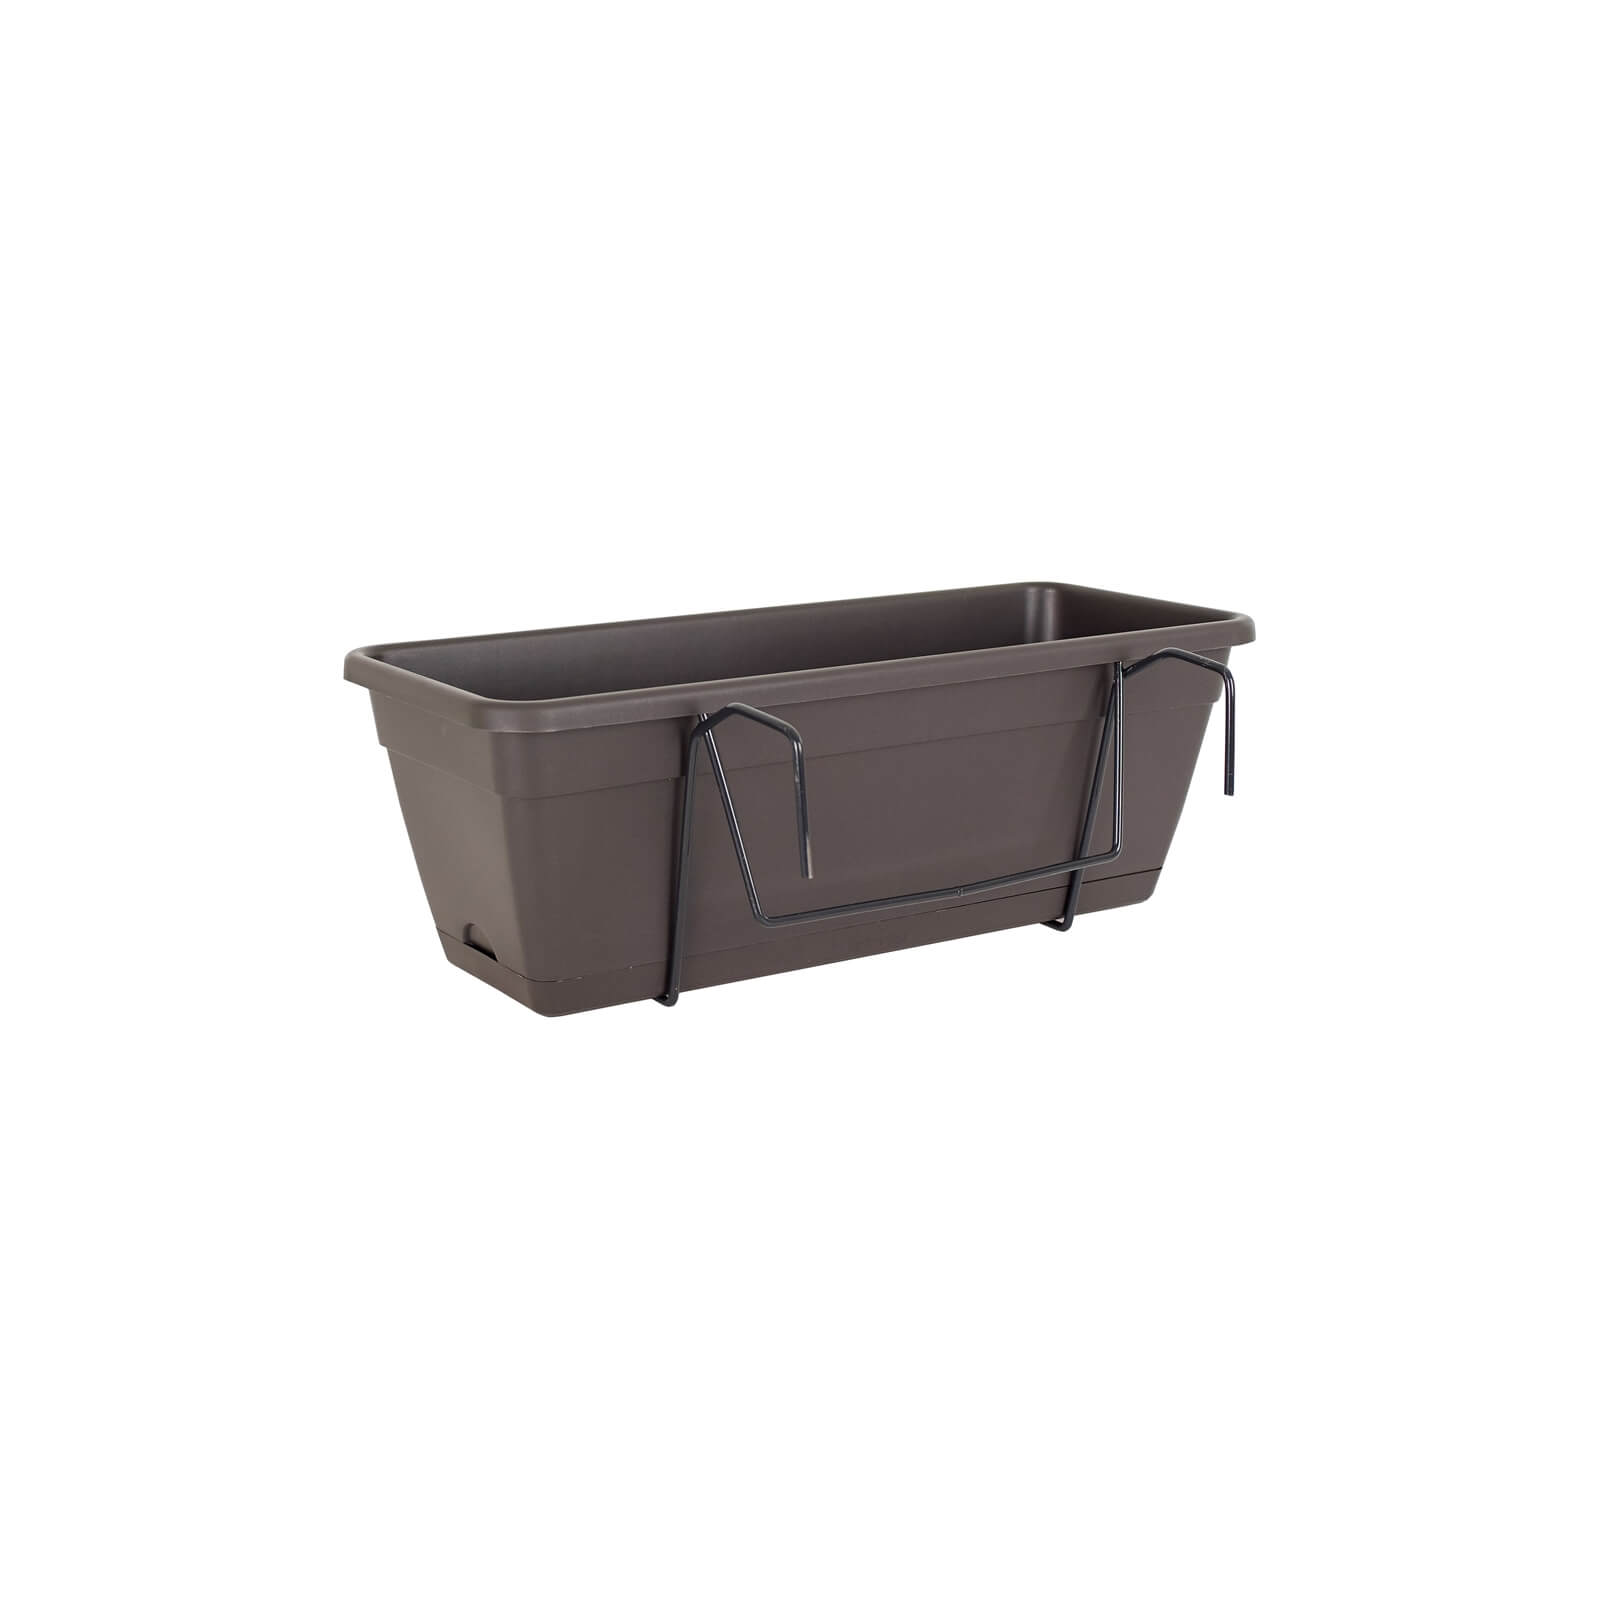 Balcony Trough Kit in Anthracite - 30cm